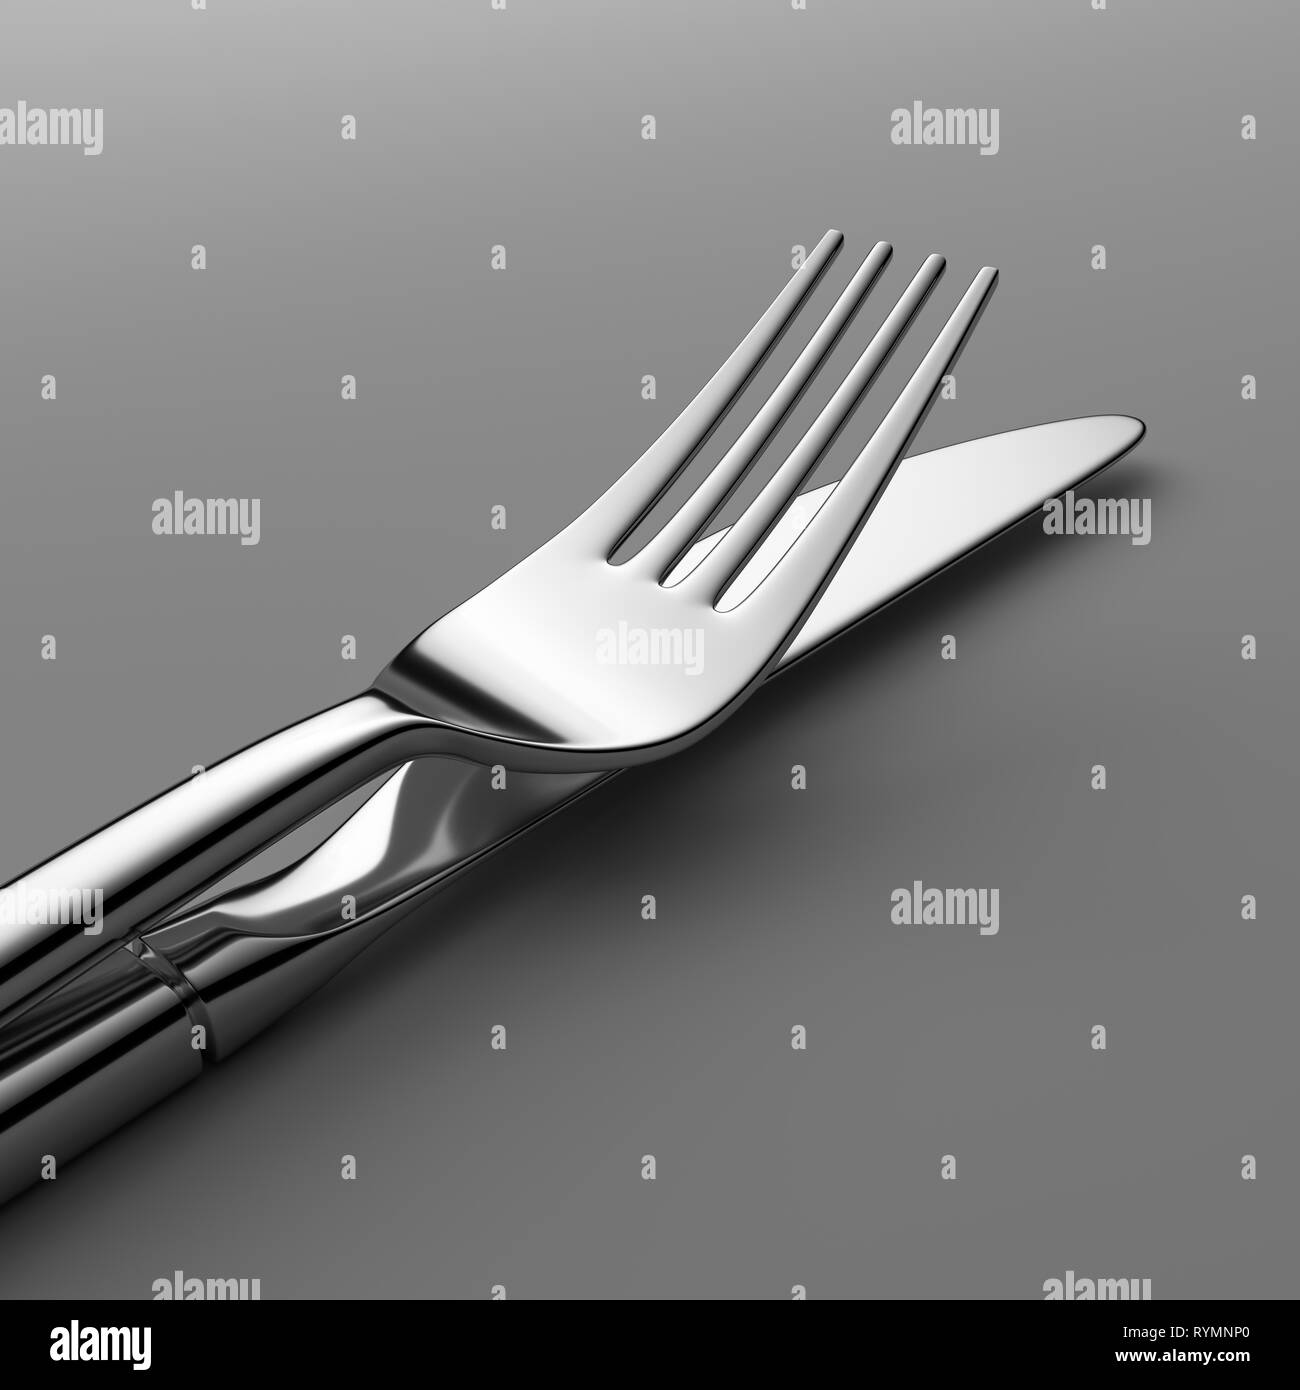 Knife and fork Stock Photo